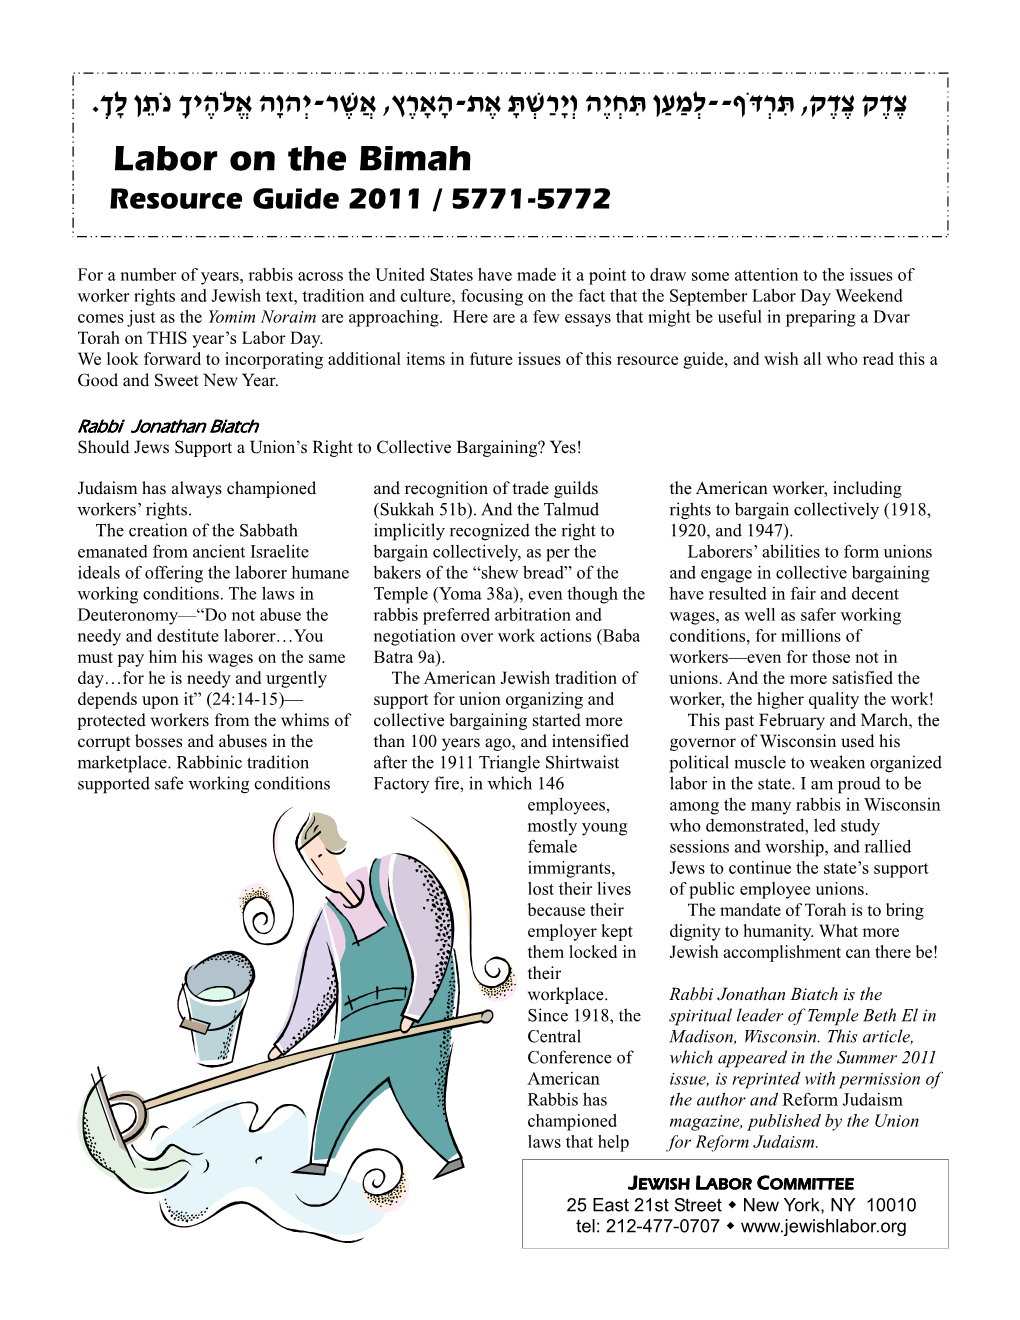 Labor on the Bimah Resource Guide 2011 / 5771-5772